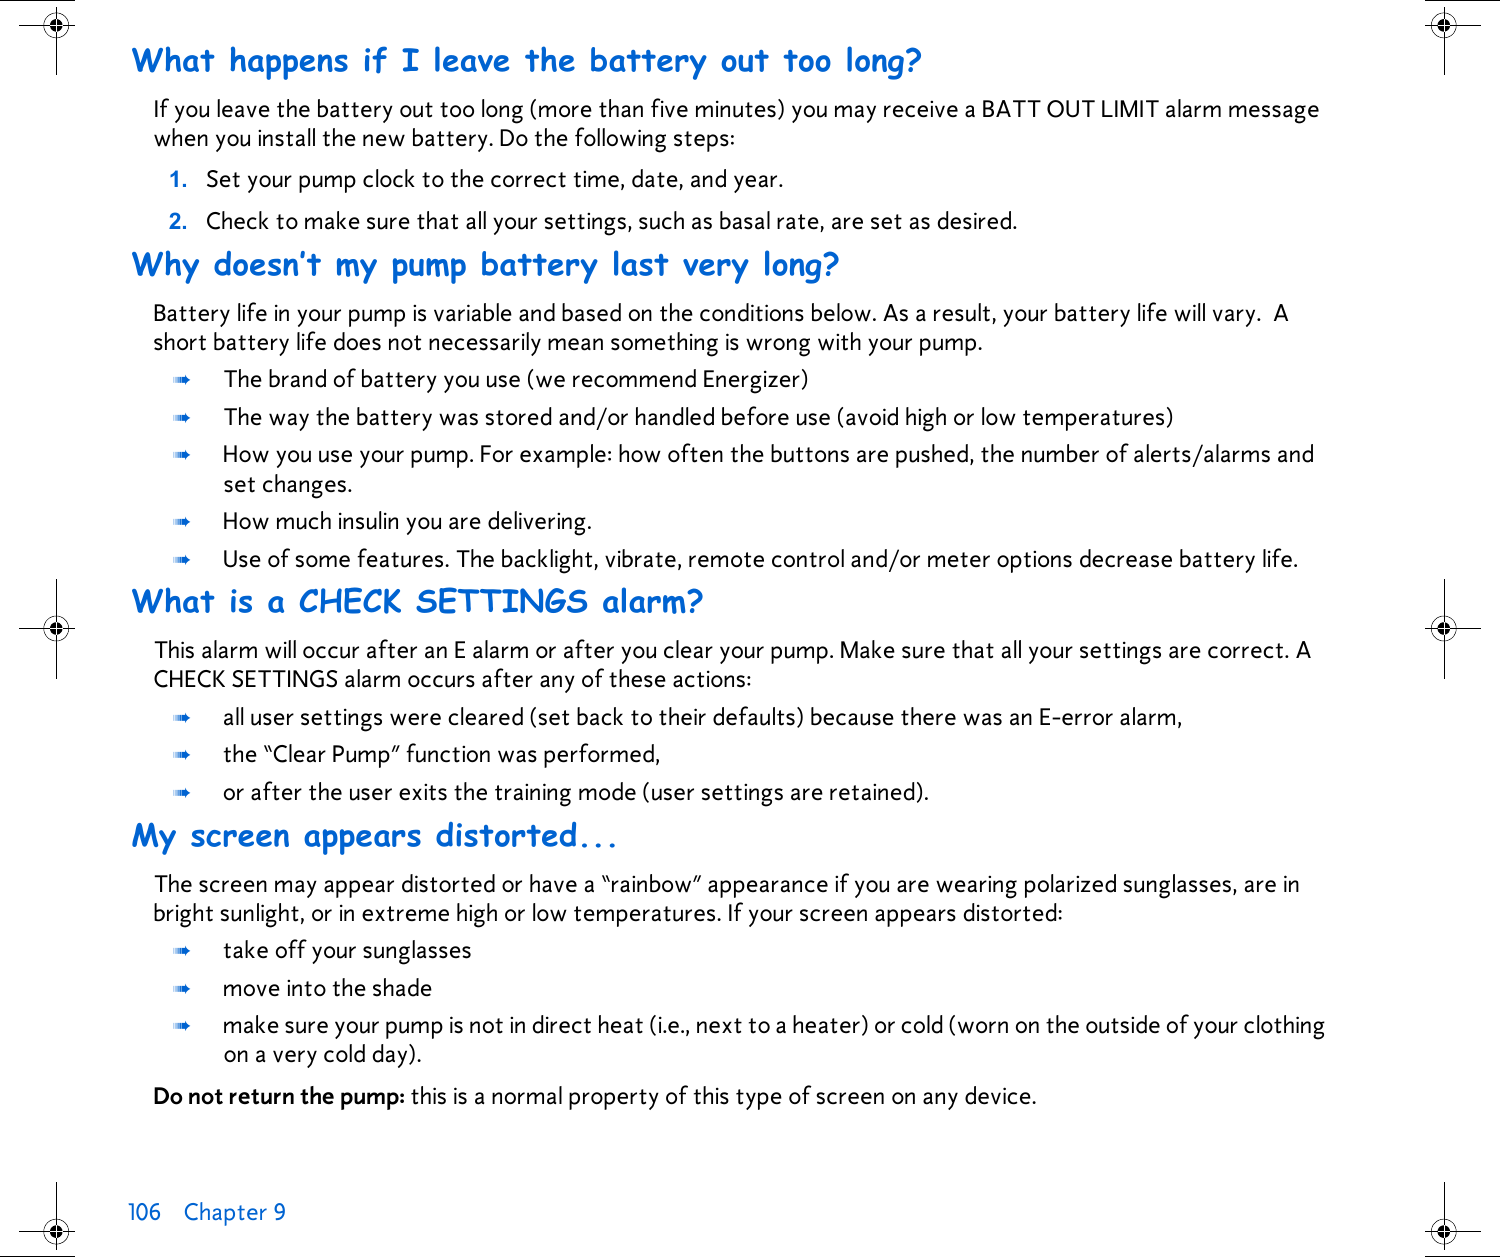 106 Chapter 9 What happens if I leave the battery out too long?If you leave the battery out too long (more than five minutes) you may receive a BATT OUT LIMIT alarm message when you install the new battery. Do the following steps:1. Set your pump clock to the correct time, date, and year.2. Check to make sure that all your settings, such as basal rate, are set as desired. Why doesn’t my pump battery last very long?Battery life in your pump is variable and based on the conditions below. As a result, your battery life will vary.  A short battery life does not necessarily mean something is wrong with your pump.➠The brand of battery you use (we recommend Energizer) ➠The way the battery was stored and/or handled before use (avoid high or low temperatures)➠How you use your pump. For example: how often the buttons are pushed, the number of alerts/alarms and set changes.➠How much insulin you are delivering.➠Use of some features. The backlight, vibrate, remote control and/or meter options decrease battery life.What is a CHECK SETTINGS alarm?This alarm will occur after an E alarm or after you clear your pump. Make sure that all your settings are correct. A CHECK SETTINGS alarm occurs after any of these actions:➠all user settings were cleared (set back to their defaults) because there was an E-error alarm,➠the “Clear Pump” function was performed, ➠or after the user exits the training mode (user settings are retained).My screen appears distorted...The screen may appear distorted or have a “rainbow” appearance if you are wearing polarized sunglasses, are in bright sunlight, or in extreme high or low temperatures. If your screen appears distorted:➠take off your sunglasses ➠move into the shade➠make sure your pump is not in direct heat (i.e., next to a heater) or cold (worn on the outside of your clothing on a very cold day).Do not return the pump: this is a normal property of this type of screen on any device.